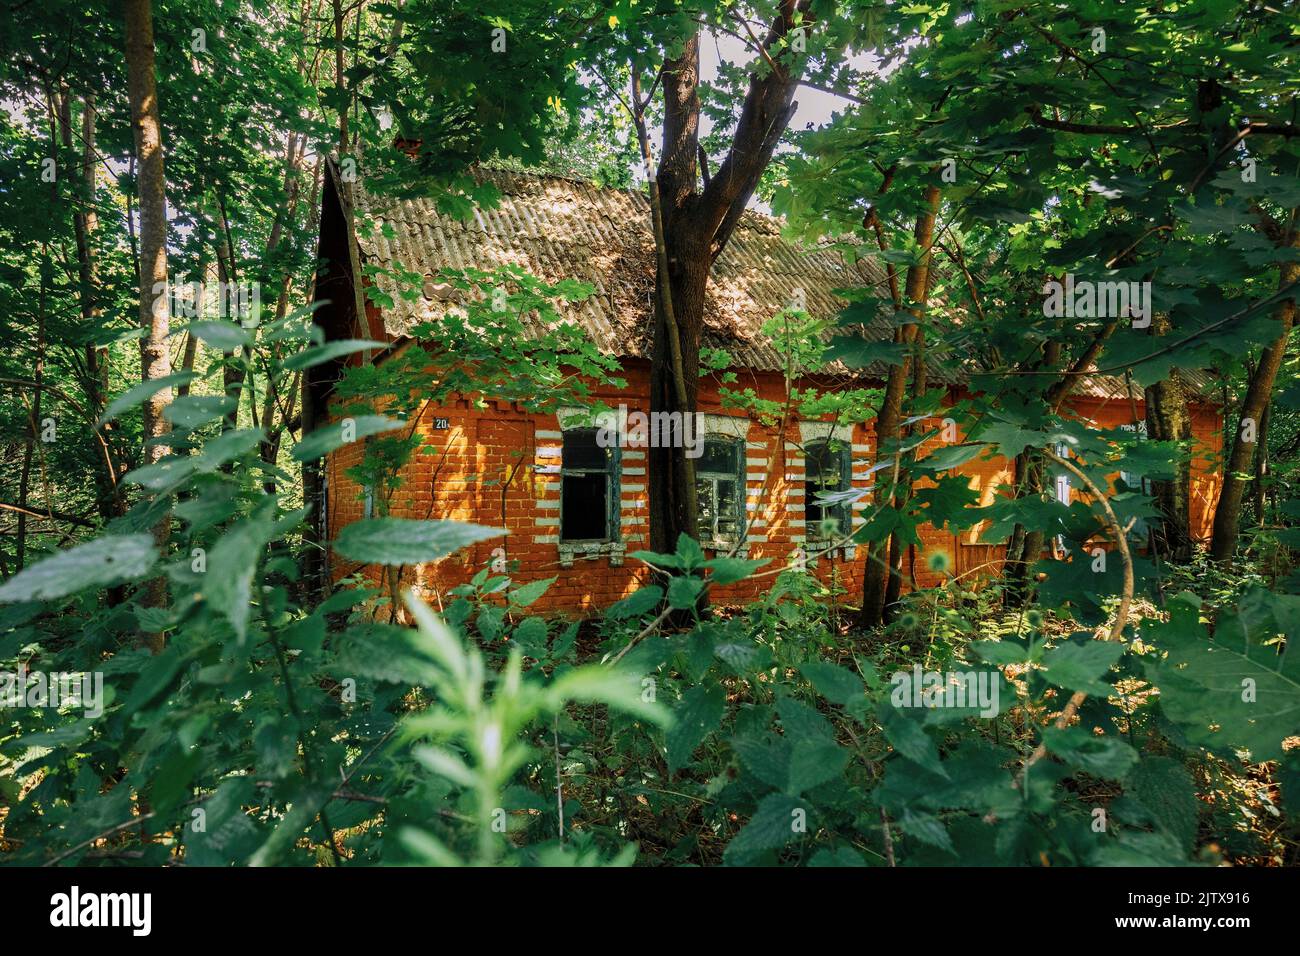 Belarus. Abandoned House Overgrown With Trees And Vegetation In Chernobyl Resettlement Zone. Chornobyl Catastrophe Disasters. Dilapidated House In Stock Photo